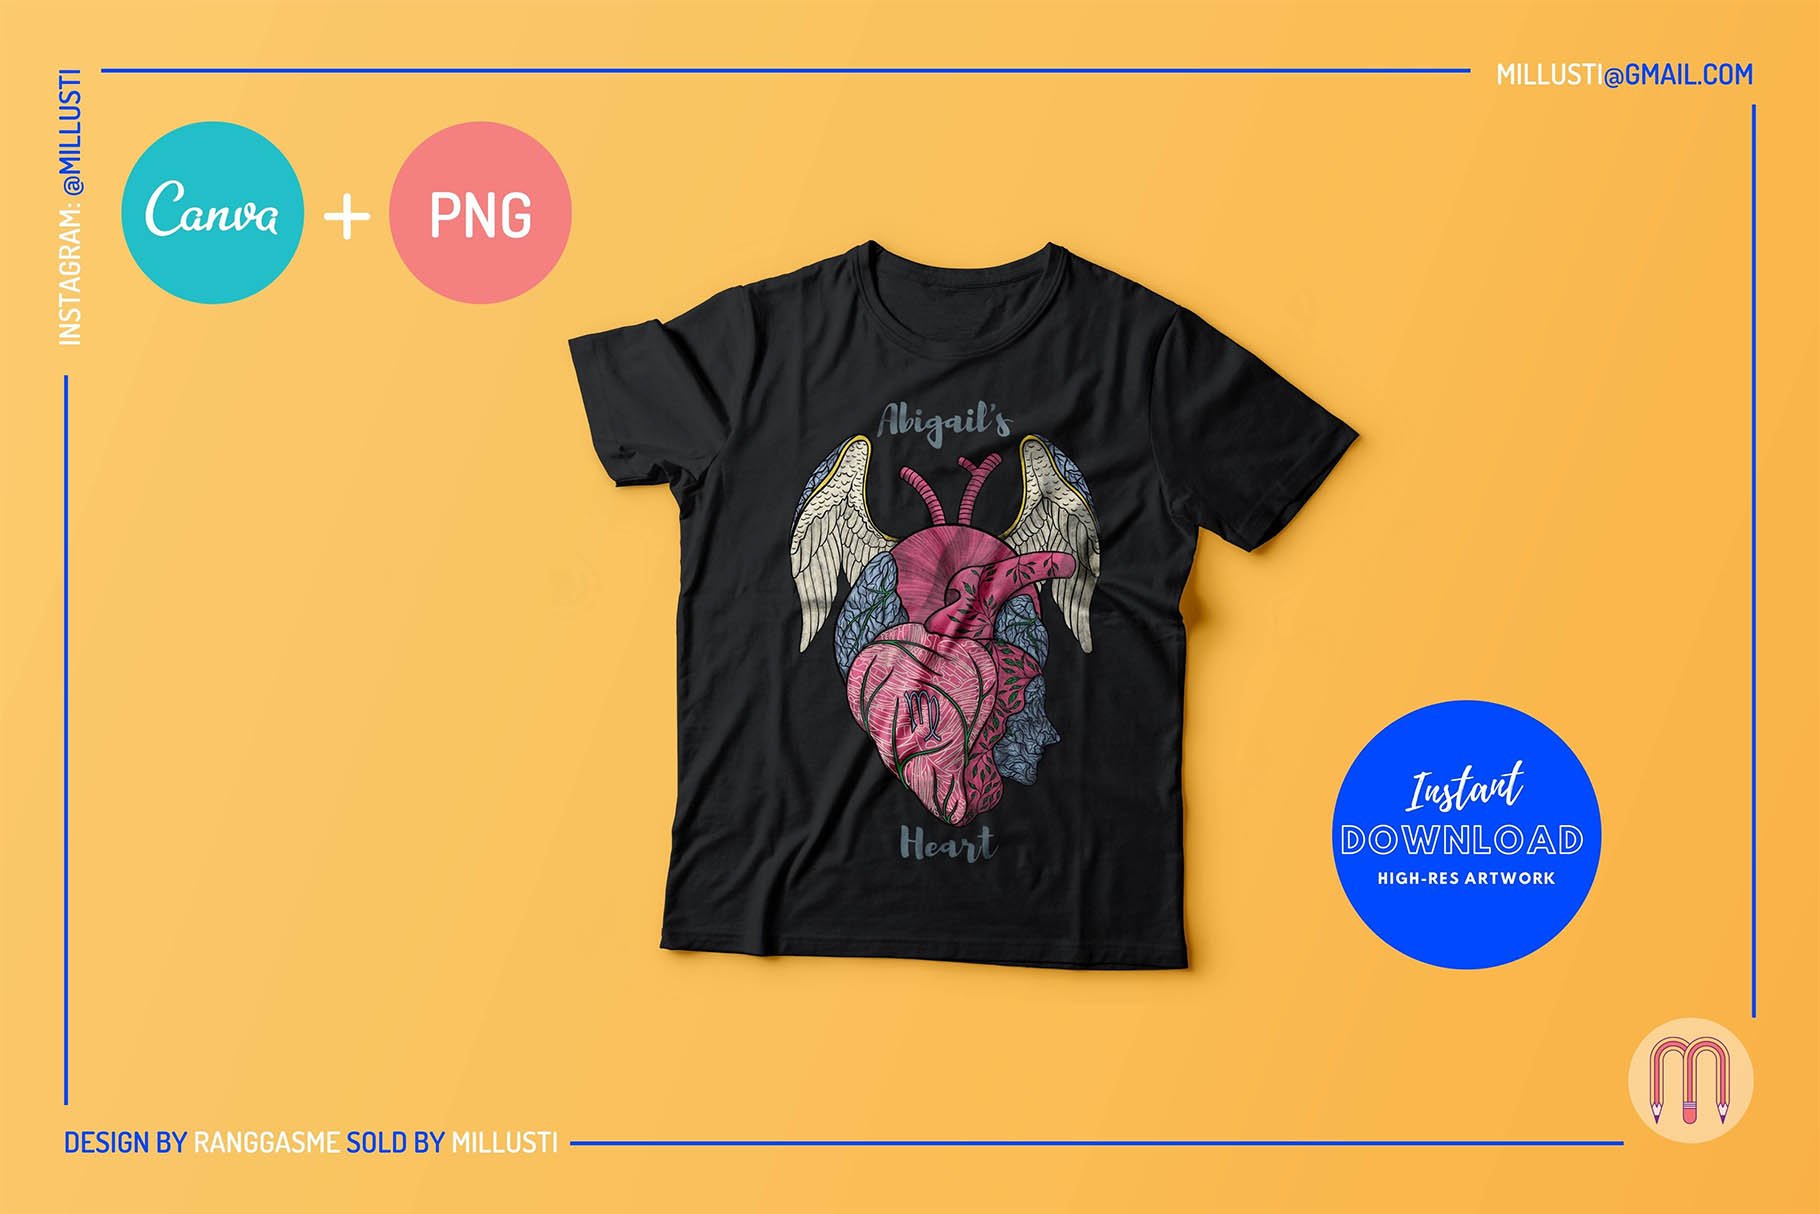 Yellow background with the black t-shirt with the heart illustration.